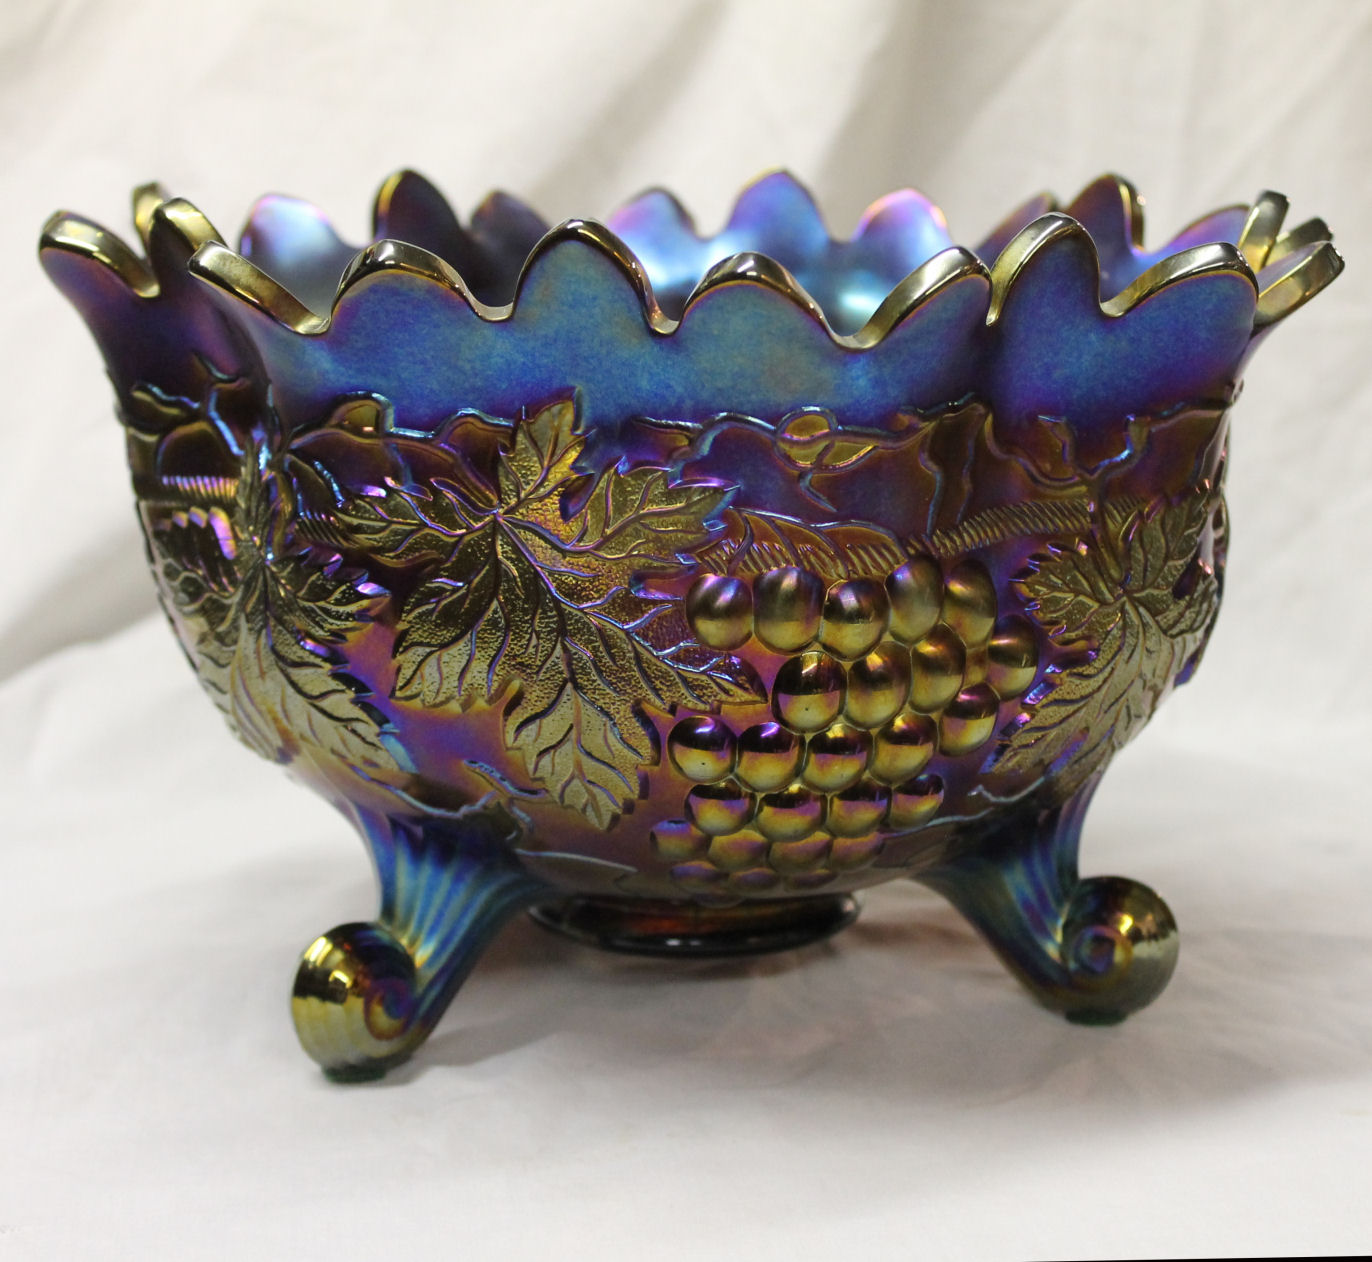 Bargain John S Antiques Large Carnival Fruit Or Orange Footed Bowl Grape And Cable Amethyst Bargain John S Antiques,Tulip Trees In Bloom